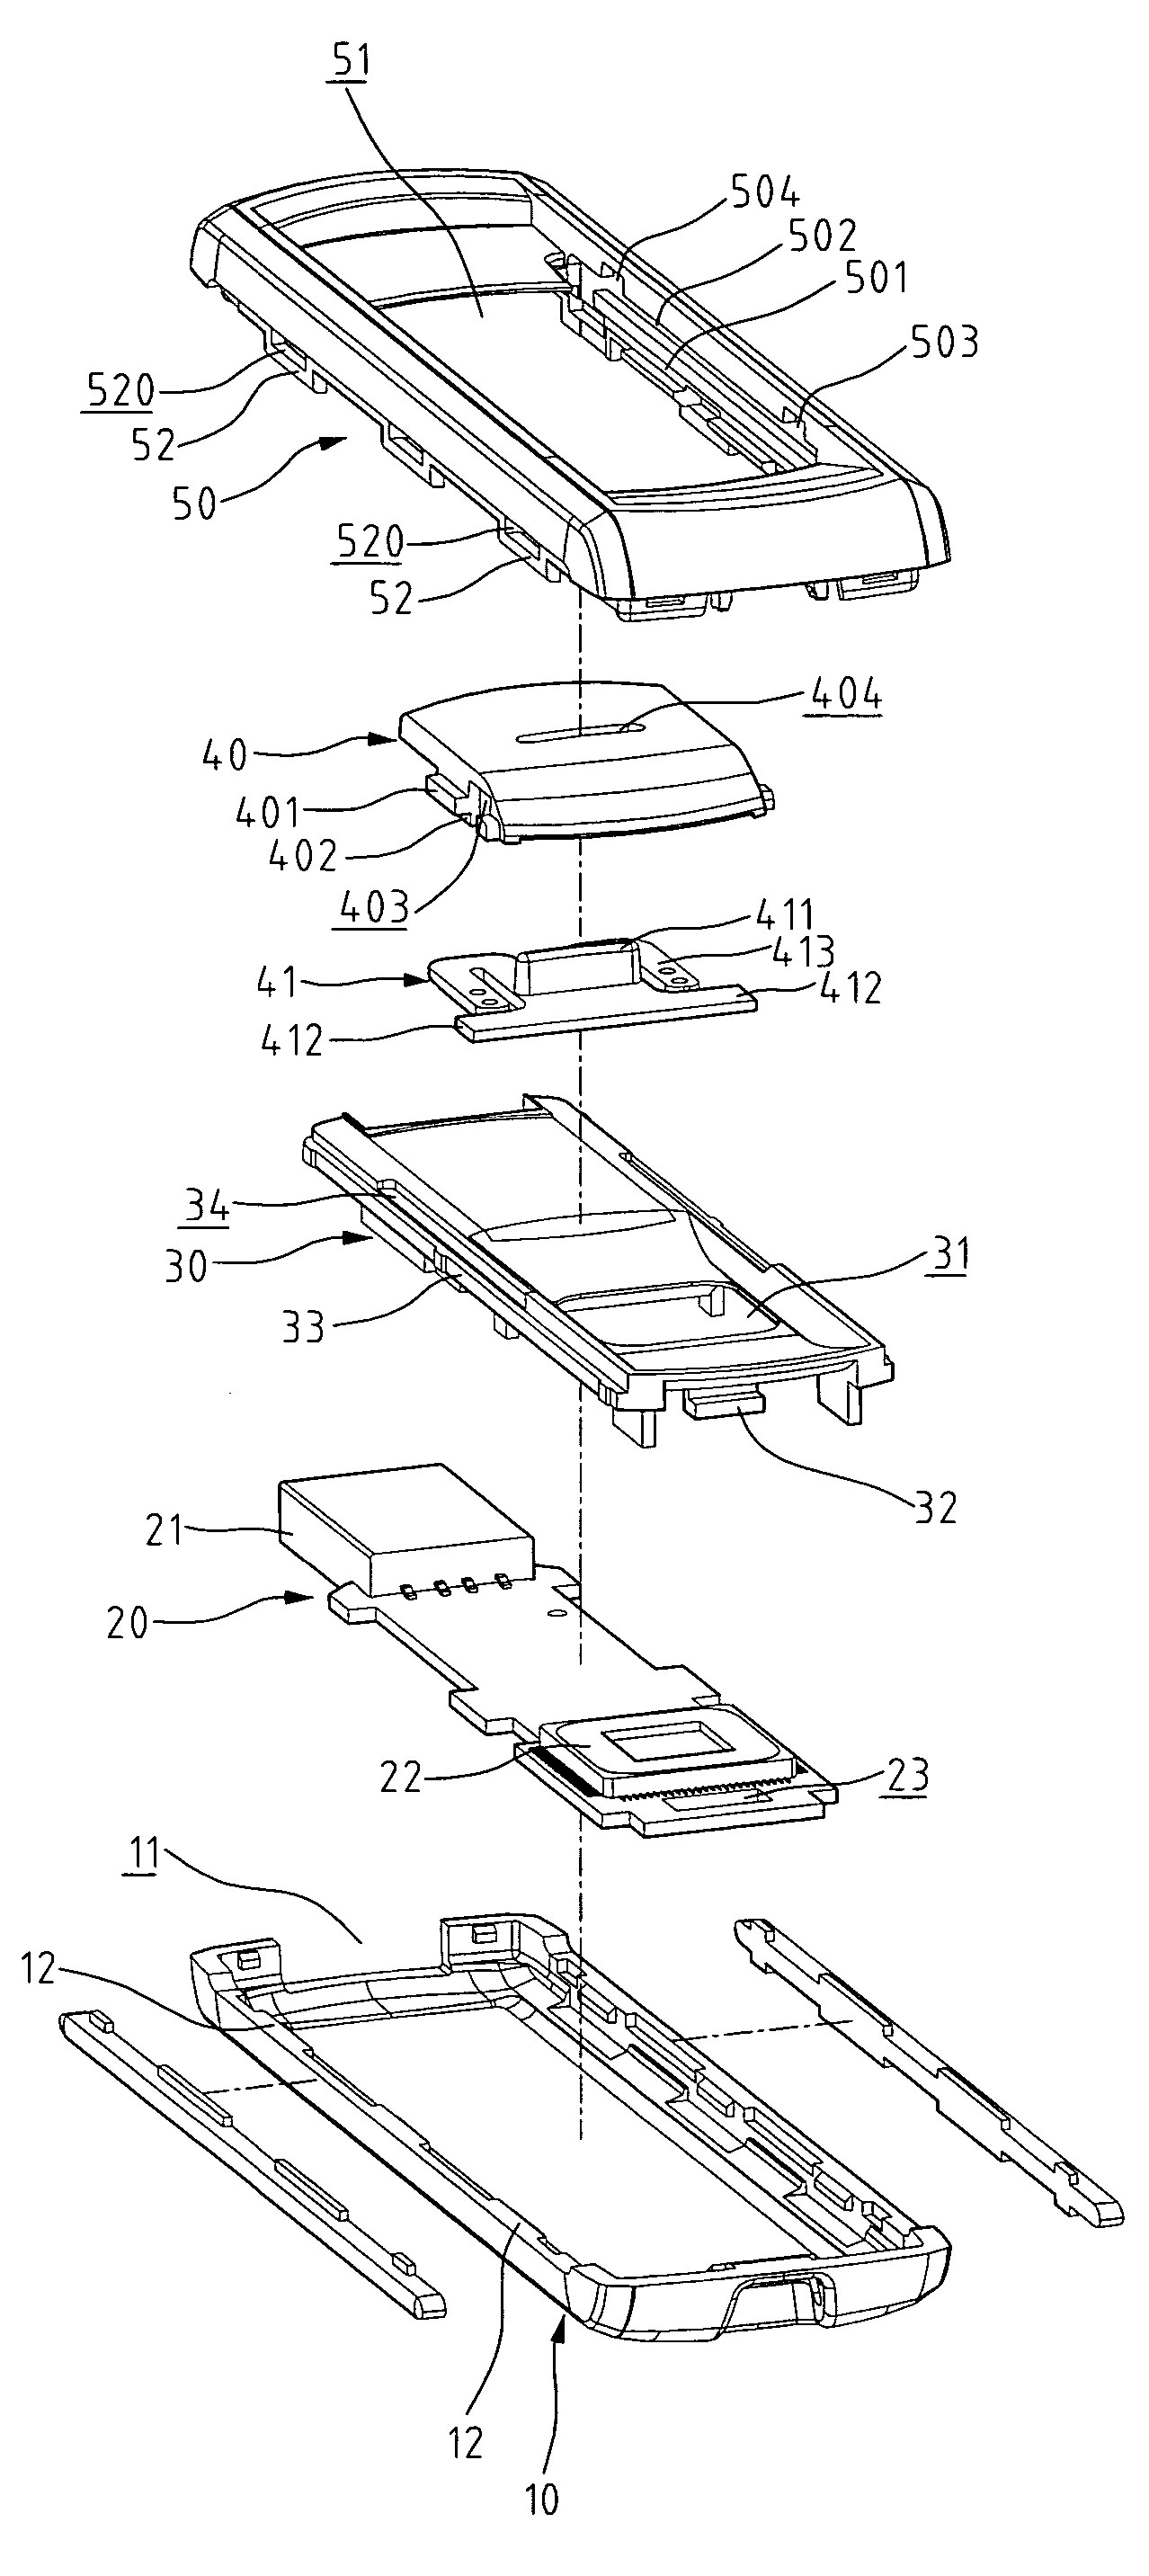 Structure for USB flash drive